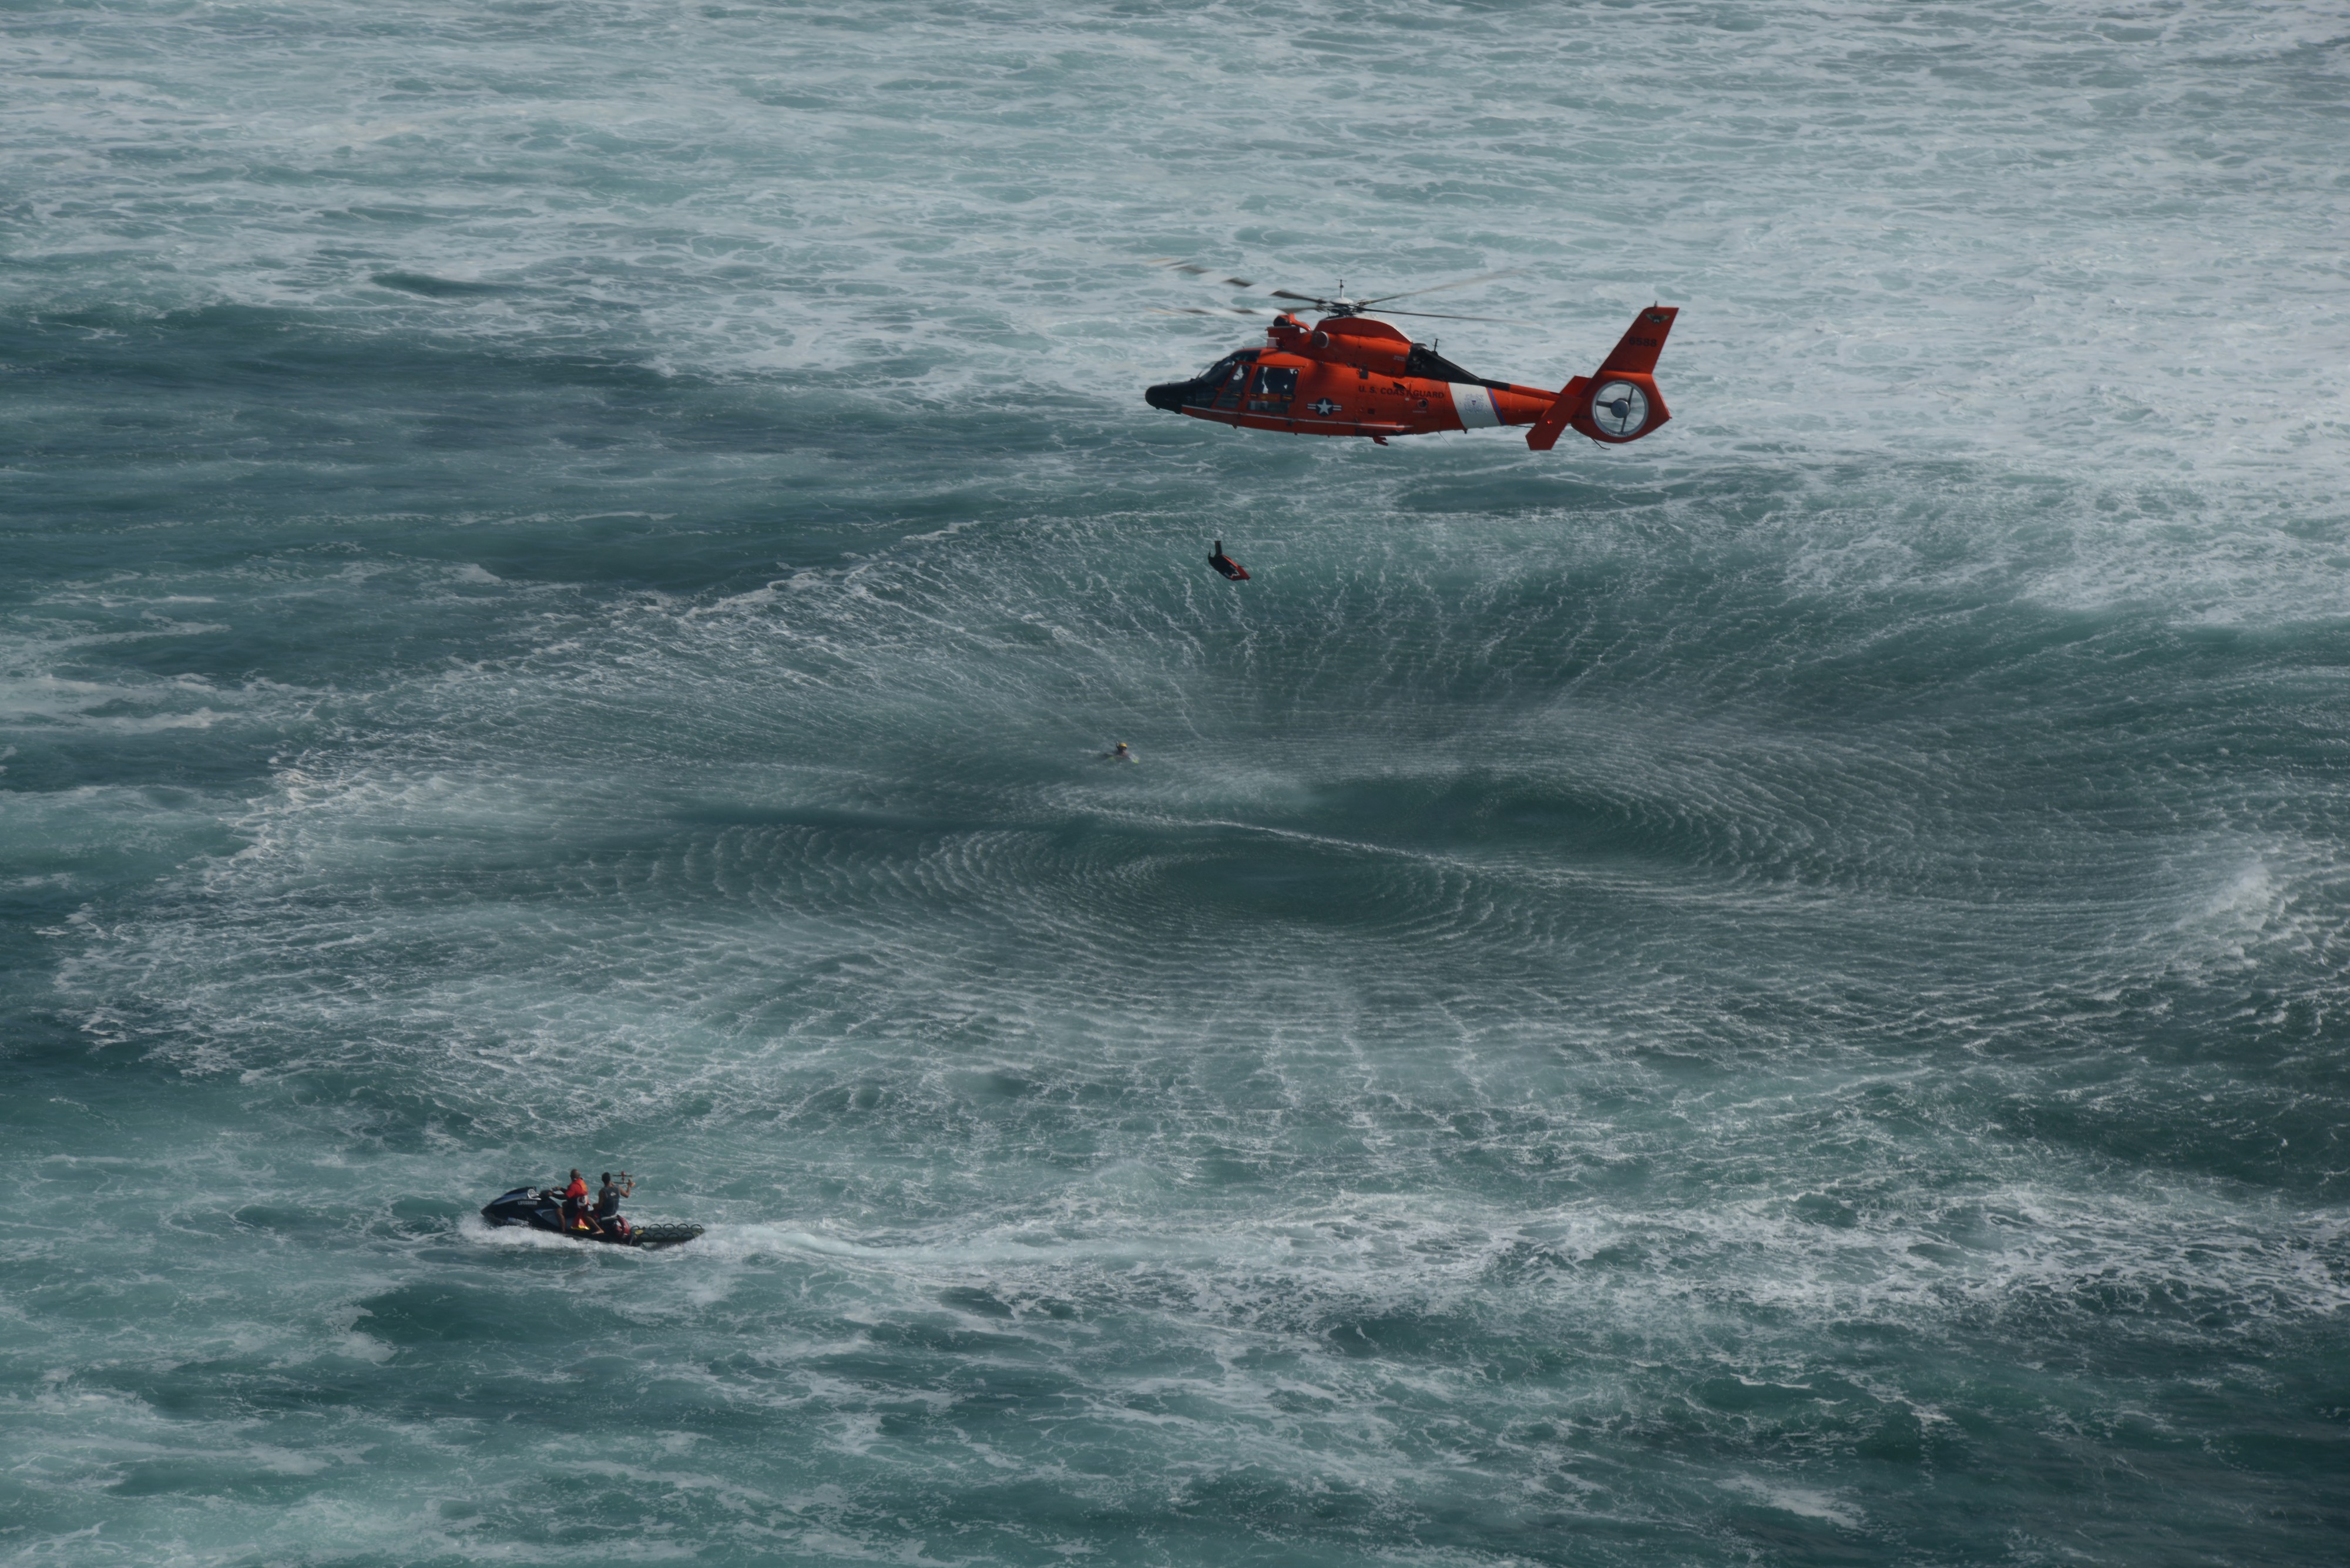 A U.S. Coast Guard MH-65 Dolphin helicopter with Air Station Barbers Point practices surf search and rescue techniques in Haleiwa, Hawaii, Jan. 18, 2013 130118-G-ZQ587-002